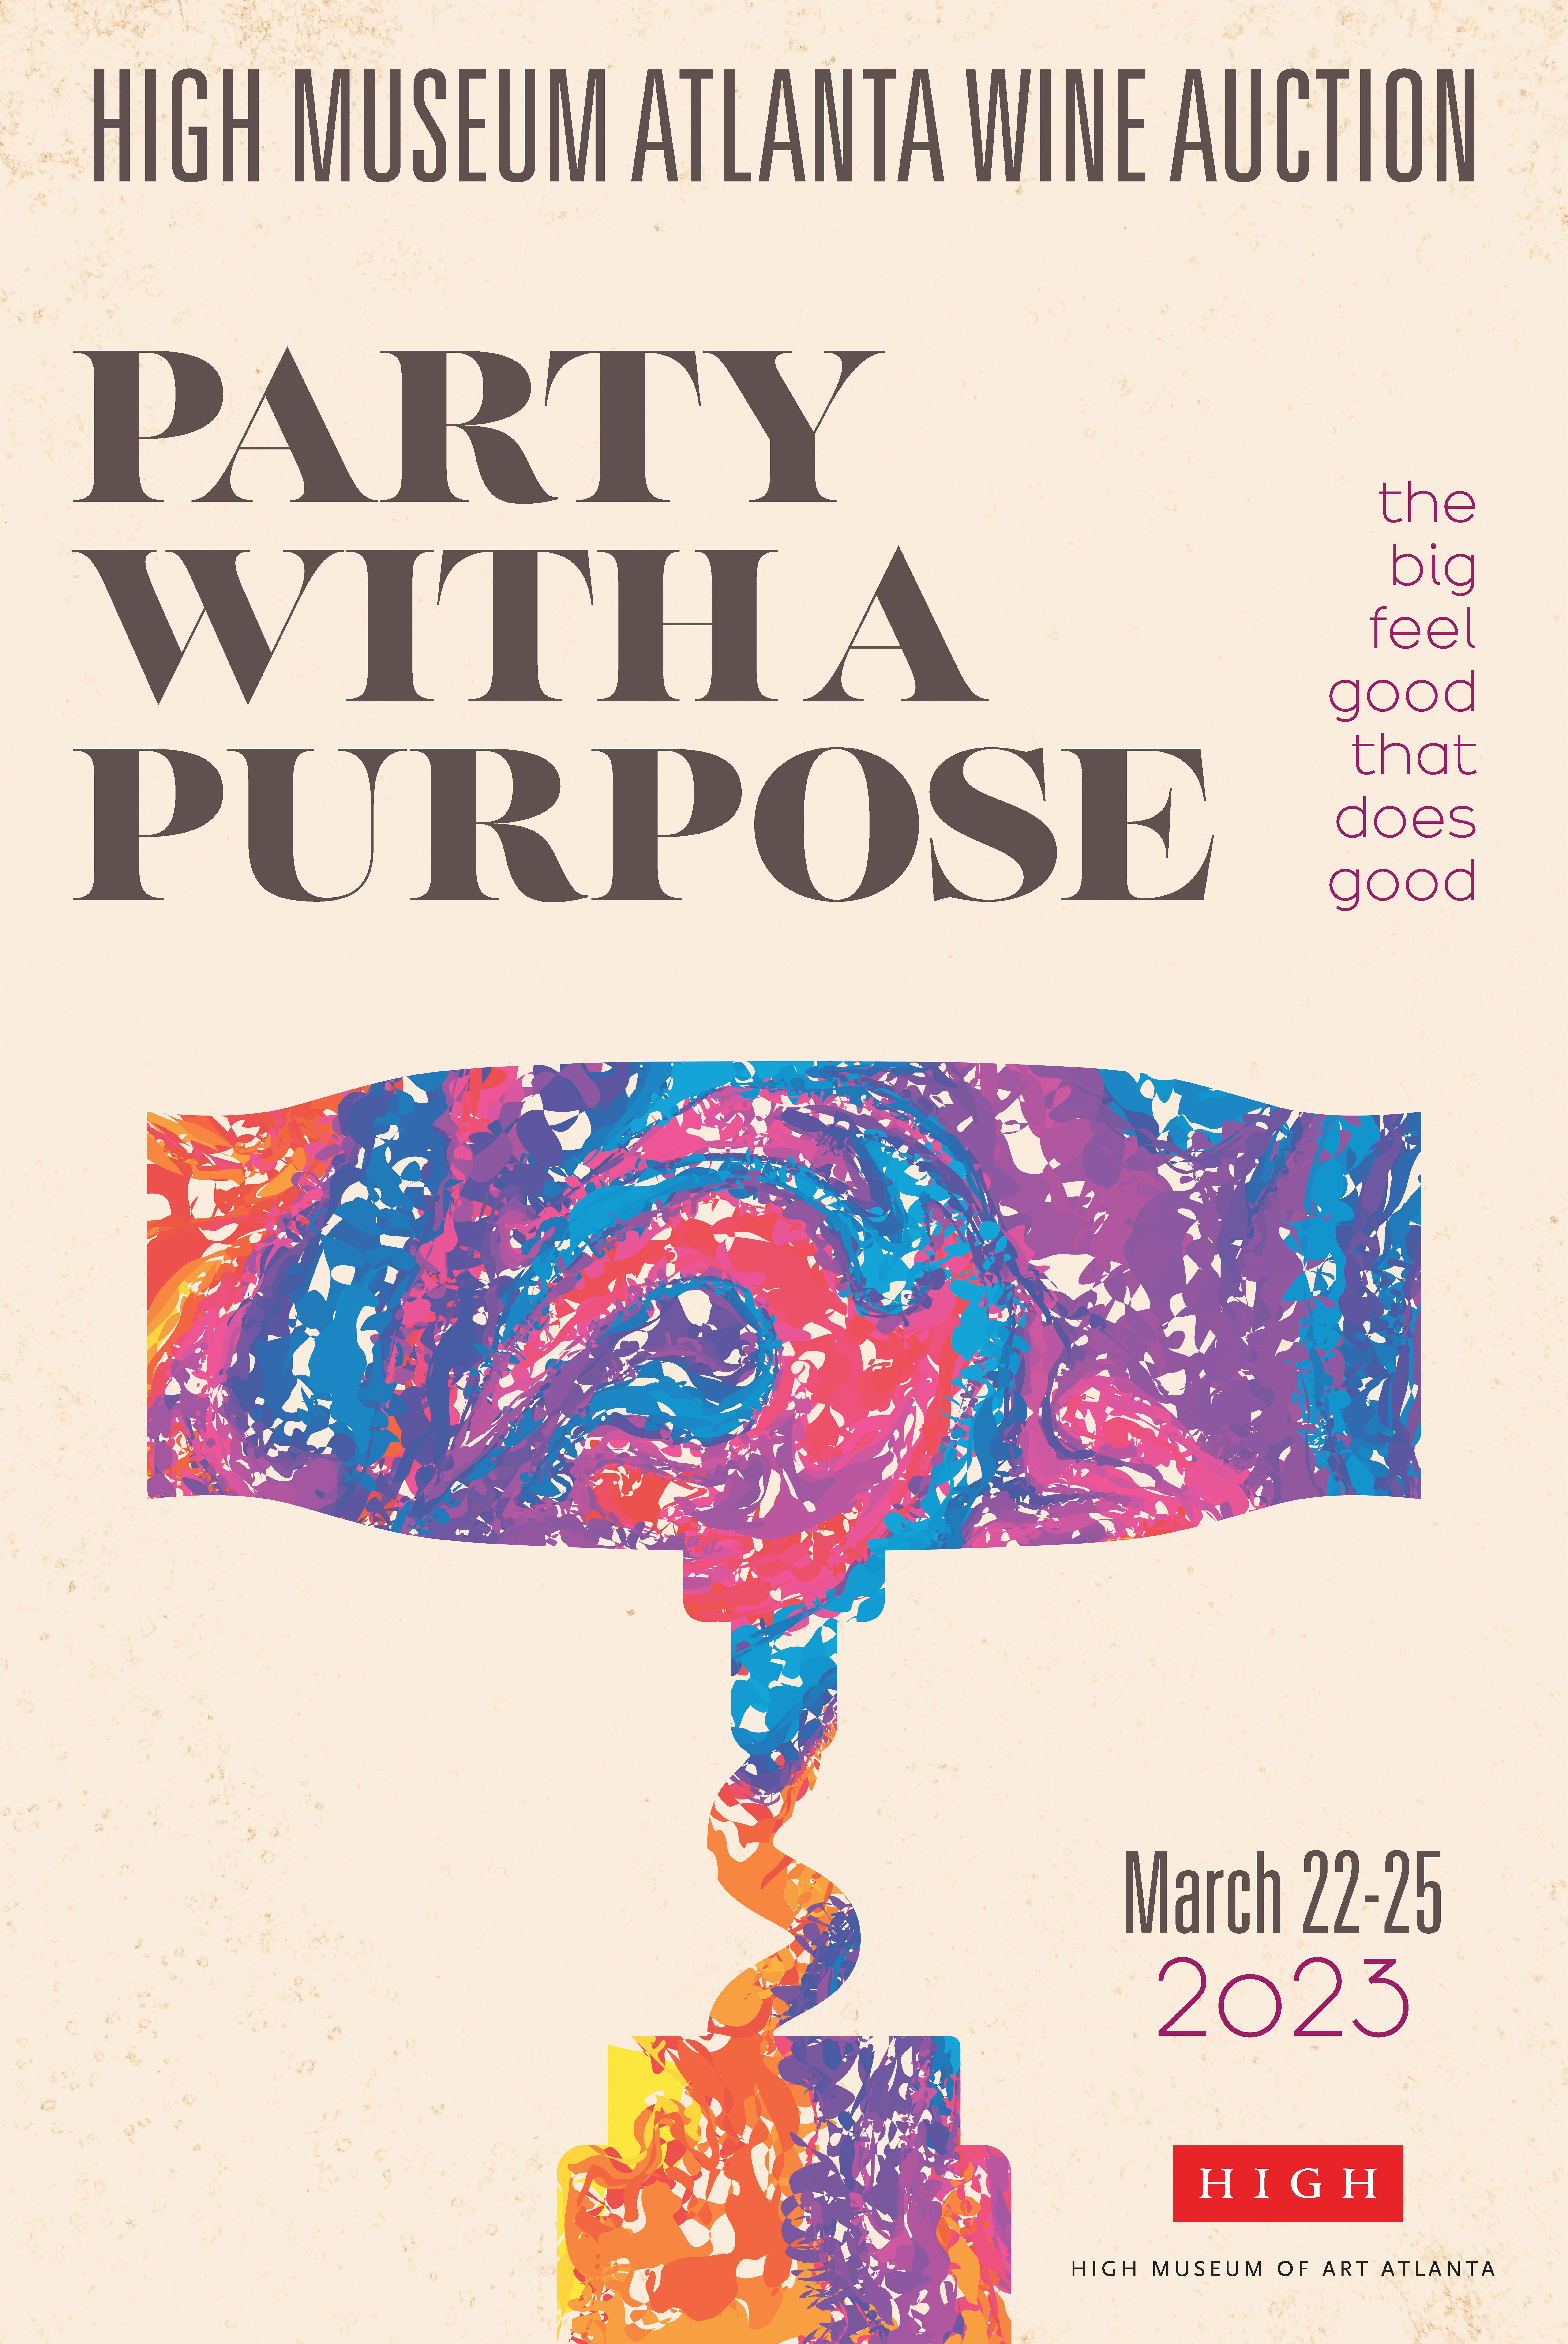 Text flyer announcing the theme of the 2023 Wine Auction: Party with a Purpose